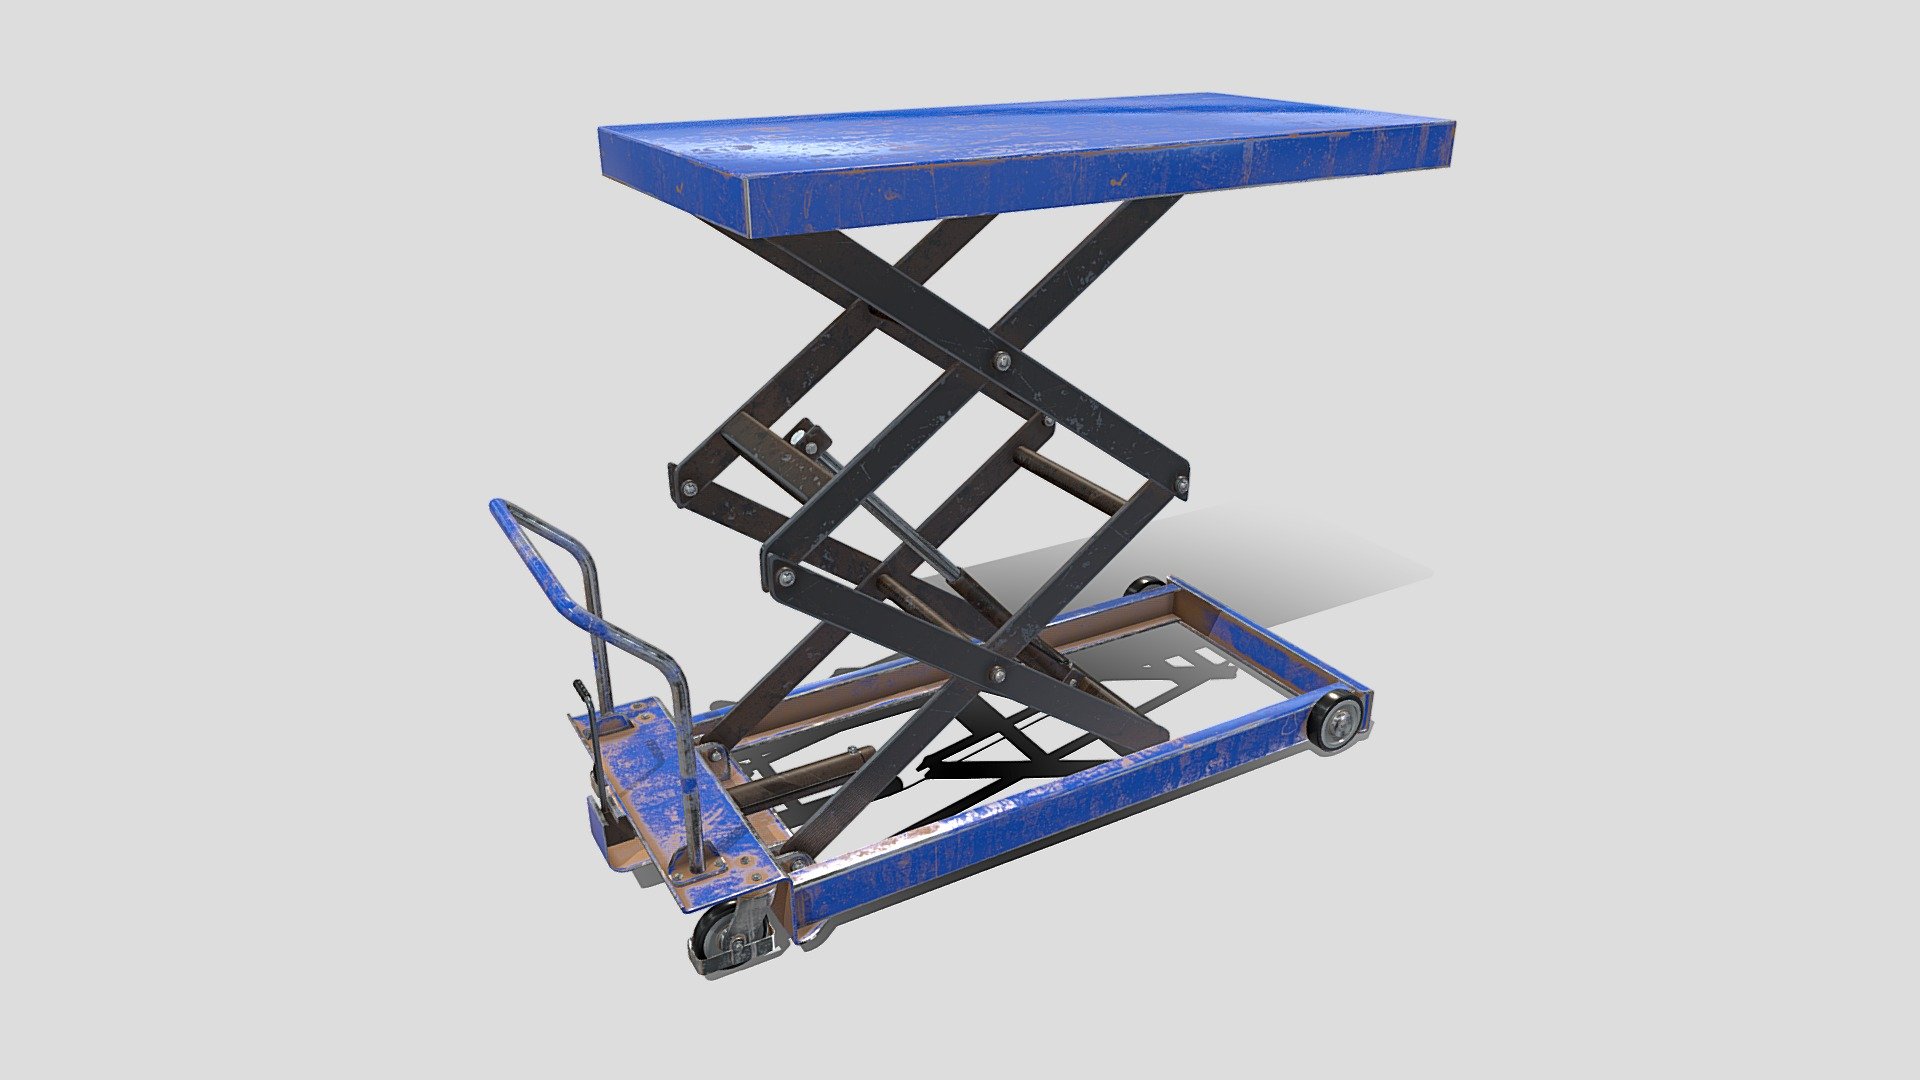 Scissor lift 3d model rendered with Cycles in Blender, as per seen on attached images. 
The model is scaled to real-life scale.

File formats:
-.blend, rendered with cycles, as seen in the images;
-.obj, with materials applied;
-.dae, with materials applied;
-.fbx, with materials applied;
-.stl;

Files come named appropriately and split by file format.

3D Software:
The 3D model was originally created in Blender 3.1 and rendered with Cycles.

Materials and textures:
The models have materials applied in all formats, and are ready to import and render.
Materials are image based using PBR, the model comes with five 4k png image textures.

Preview scenes:
The preview images are rendered in Blender using its built-in render engine &lsquo;Cycles'.

General:
The models are built mostly out of quads.

For any problems please feel free to contact me.

Don't forget to rate and enjoy! - Scissor Lift Table Blue - Buy Royalty Free 3D model by dragosburian 3d model